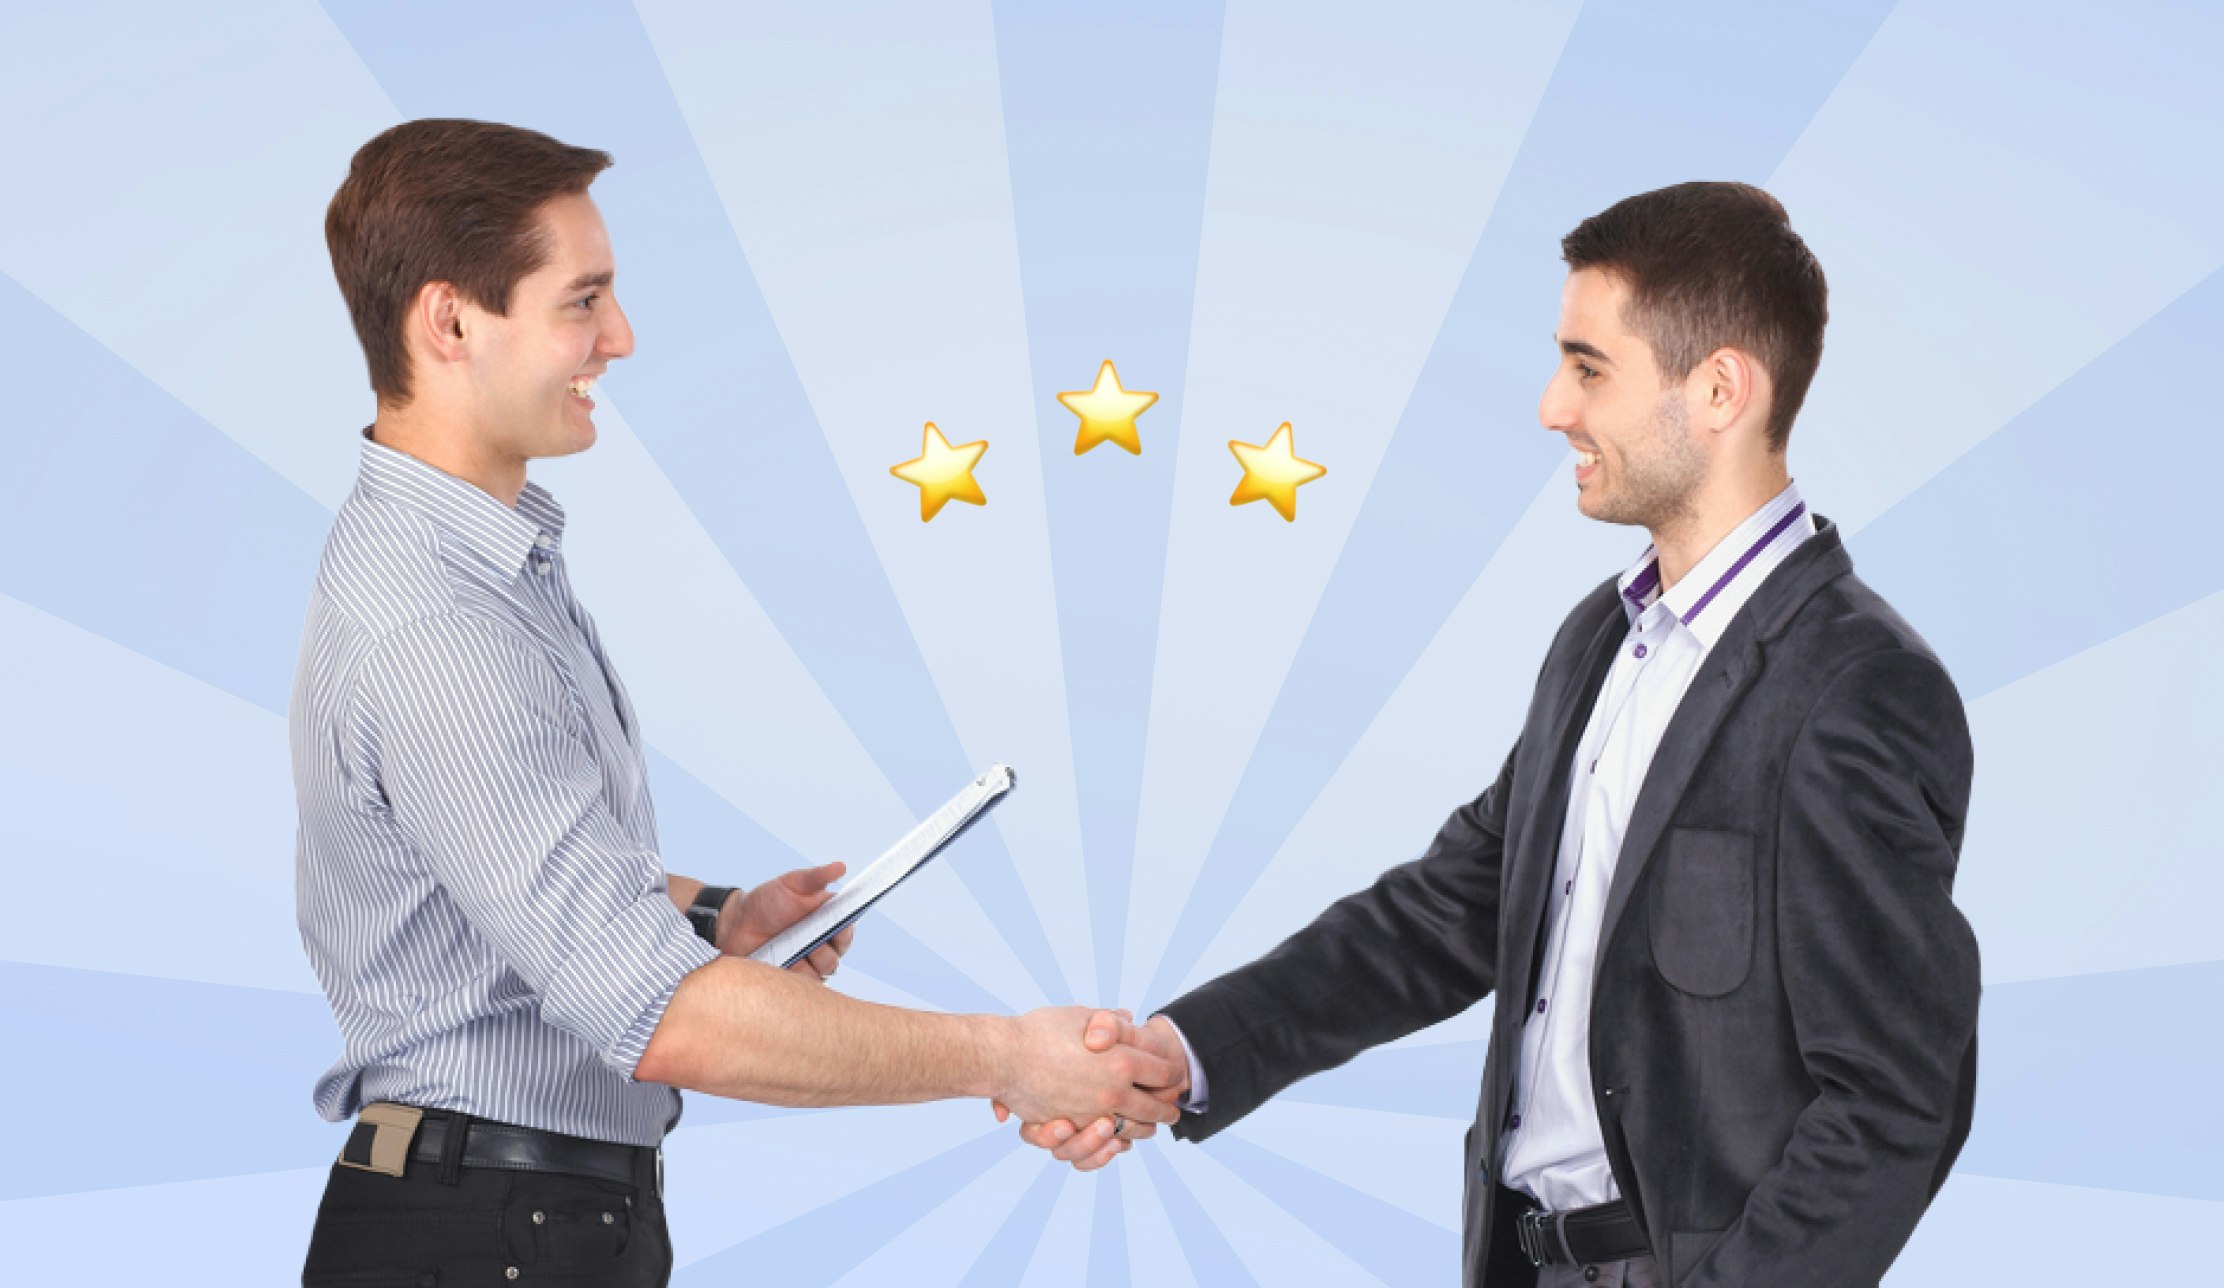 how to get courier cointracts: man meeting a client